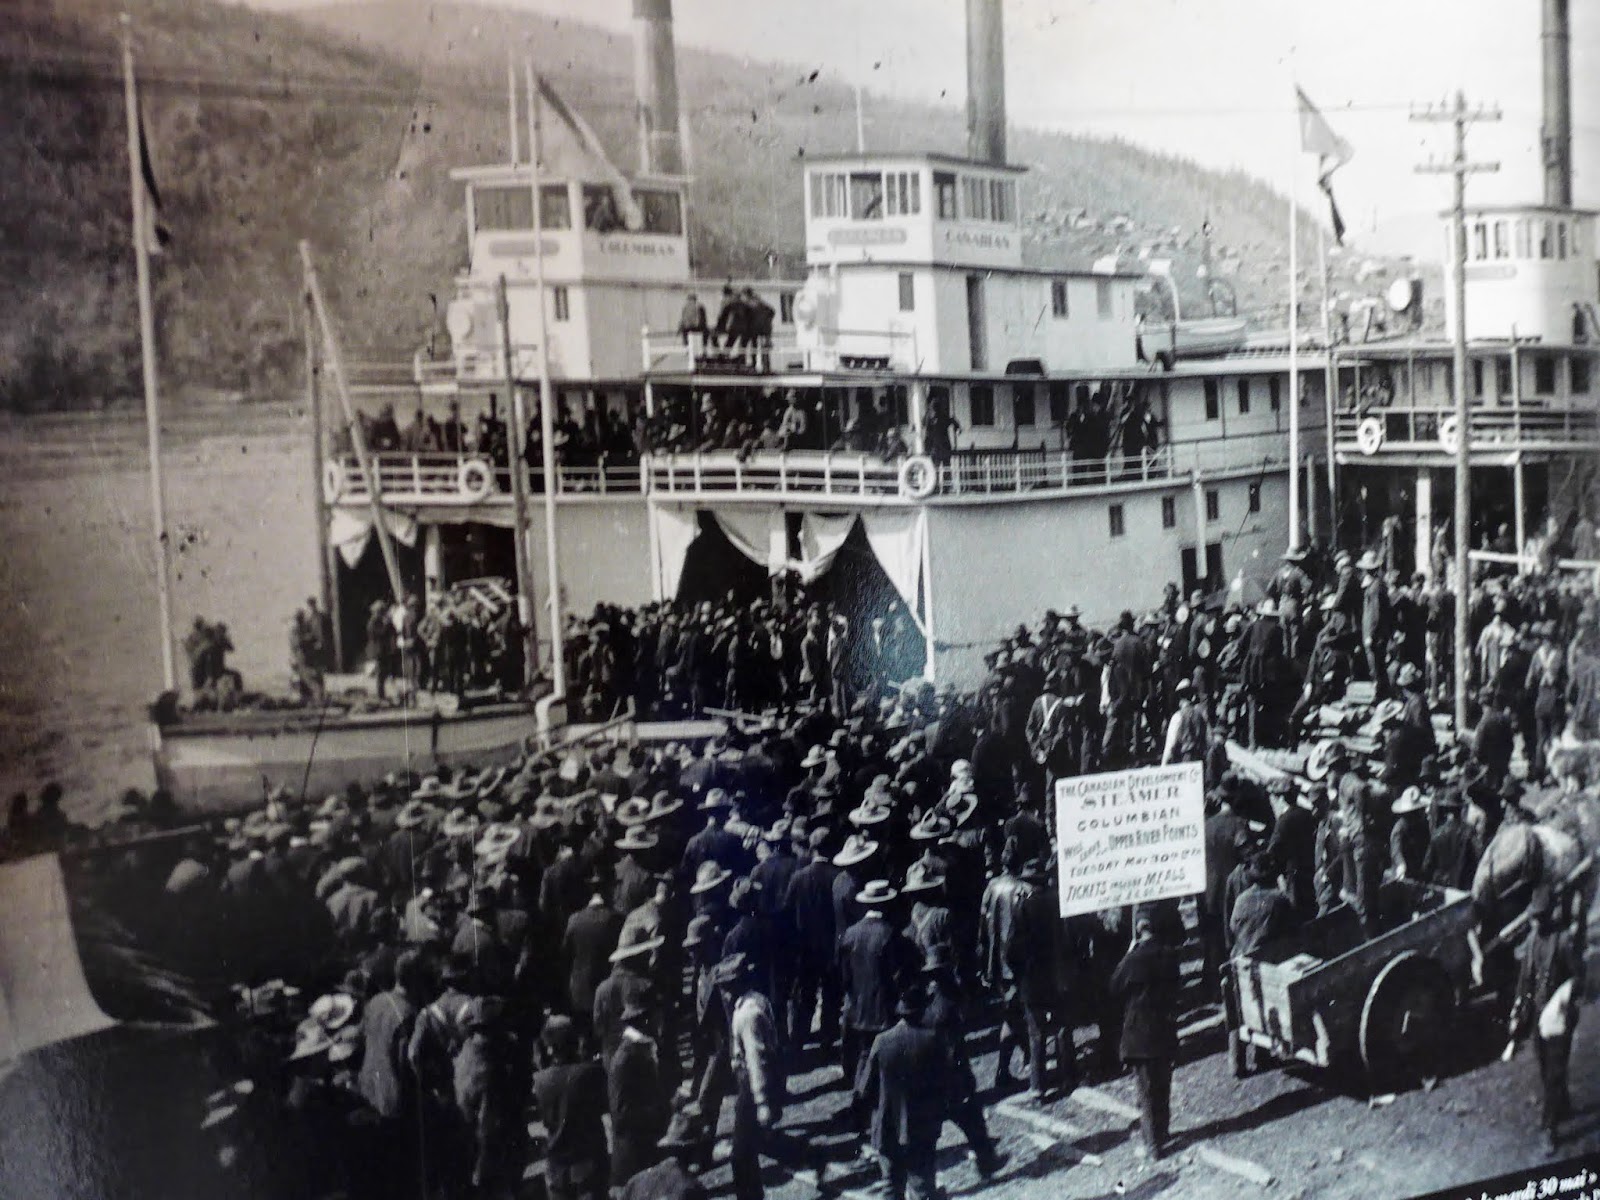 Old picture of people watching the ship arrive in the late 1800's